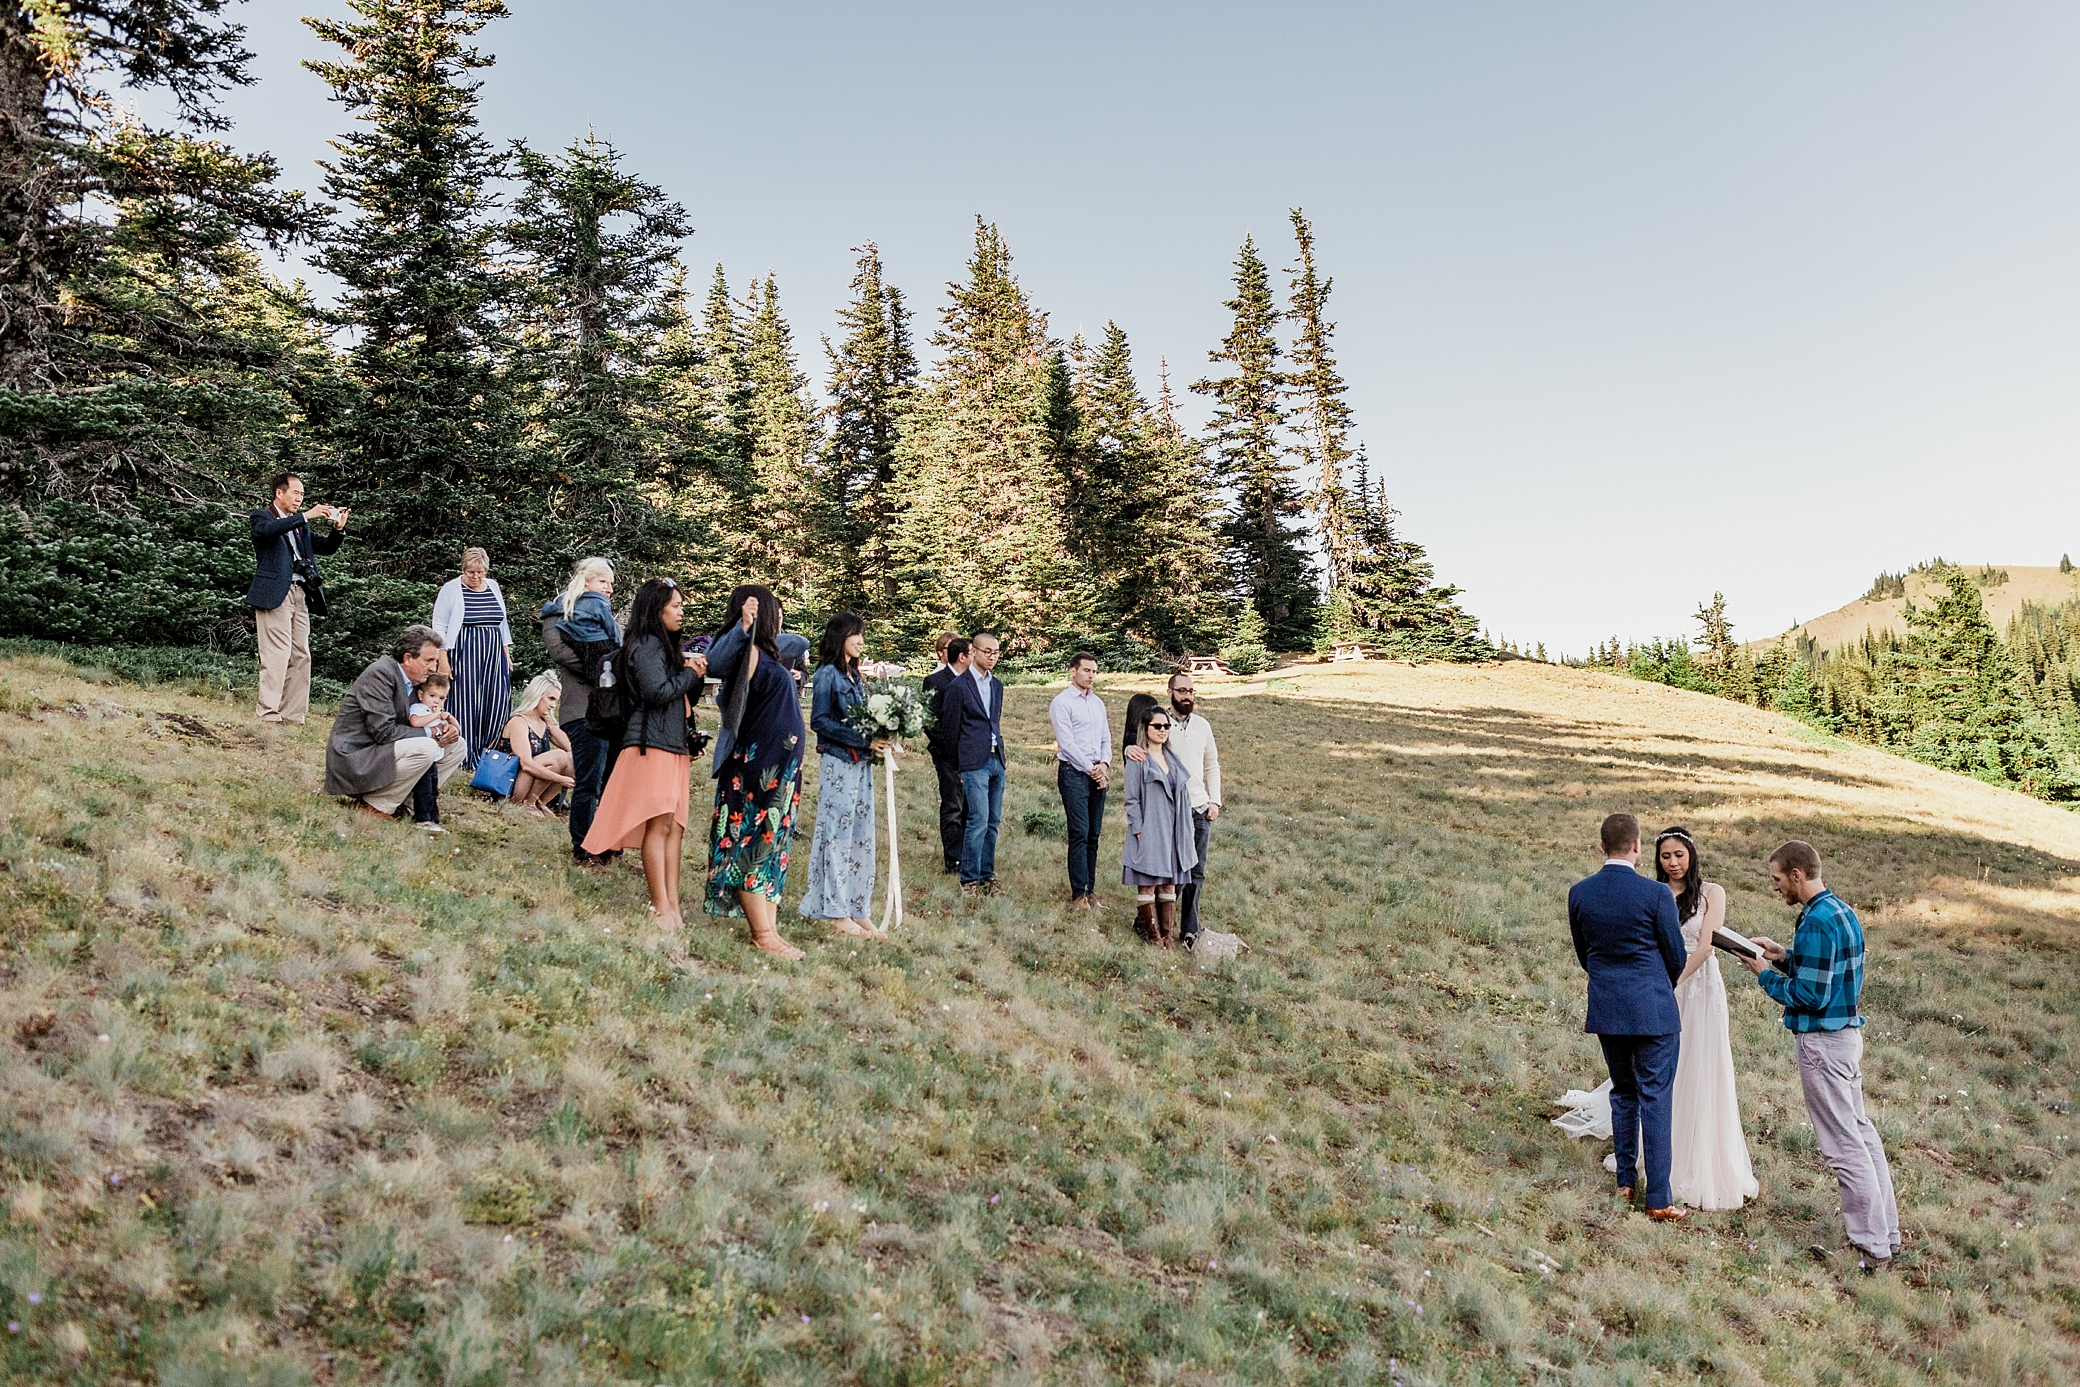 Intimate elopement ceremony with close friends and family at Hurricane Ridge in the Olympic National Park | Megan Montalvo Photography